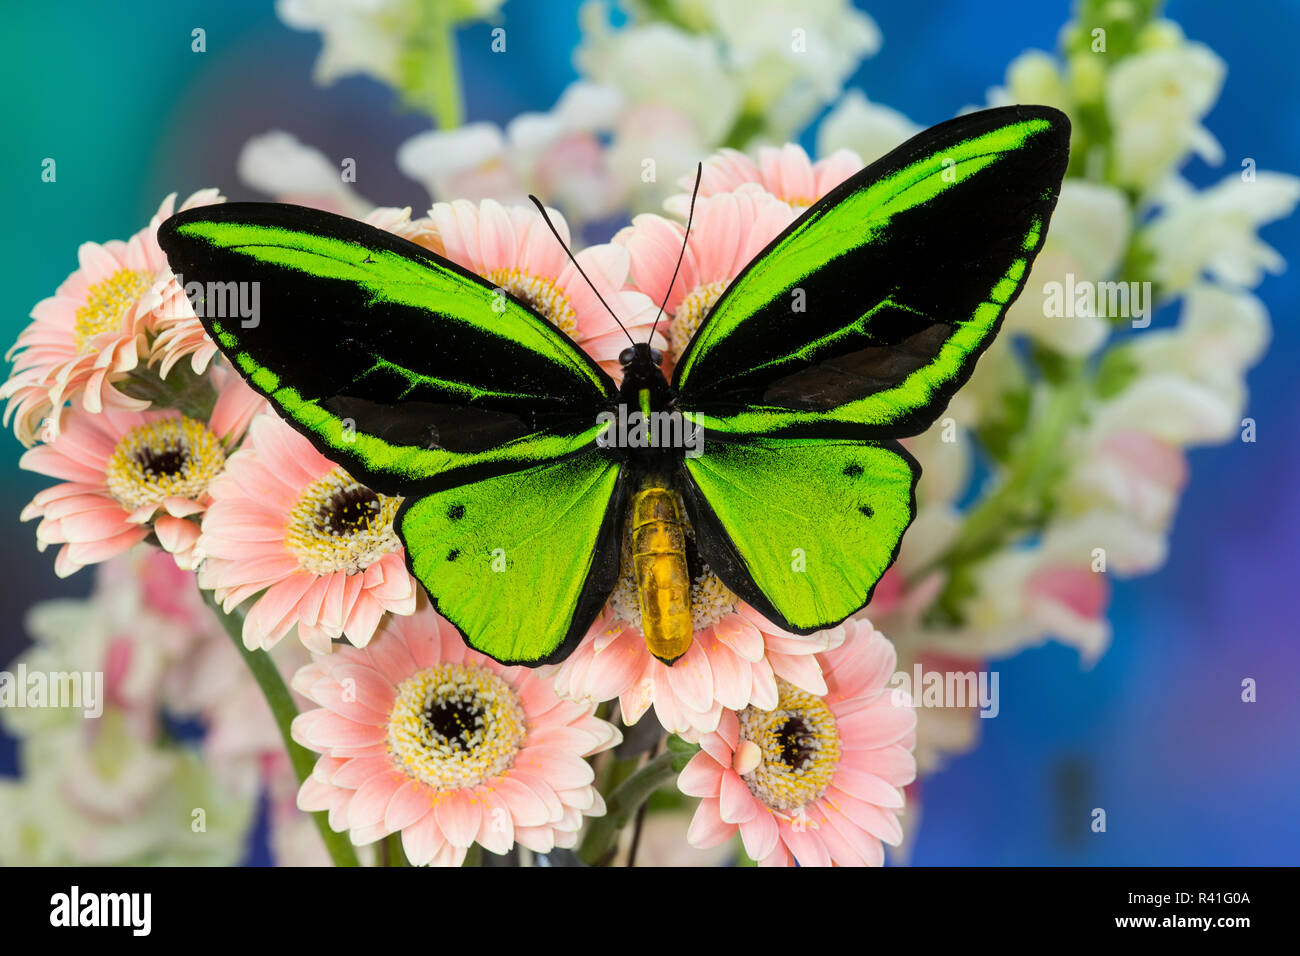 Male tropical butterfly Ornithoptera a Birdwing butterfly on Pink Gerber Daisy Stock Photo